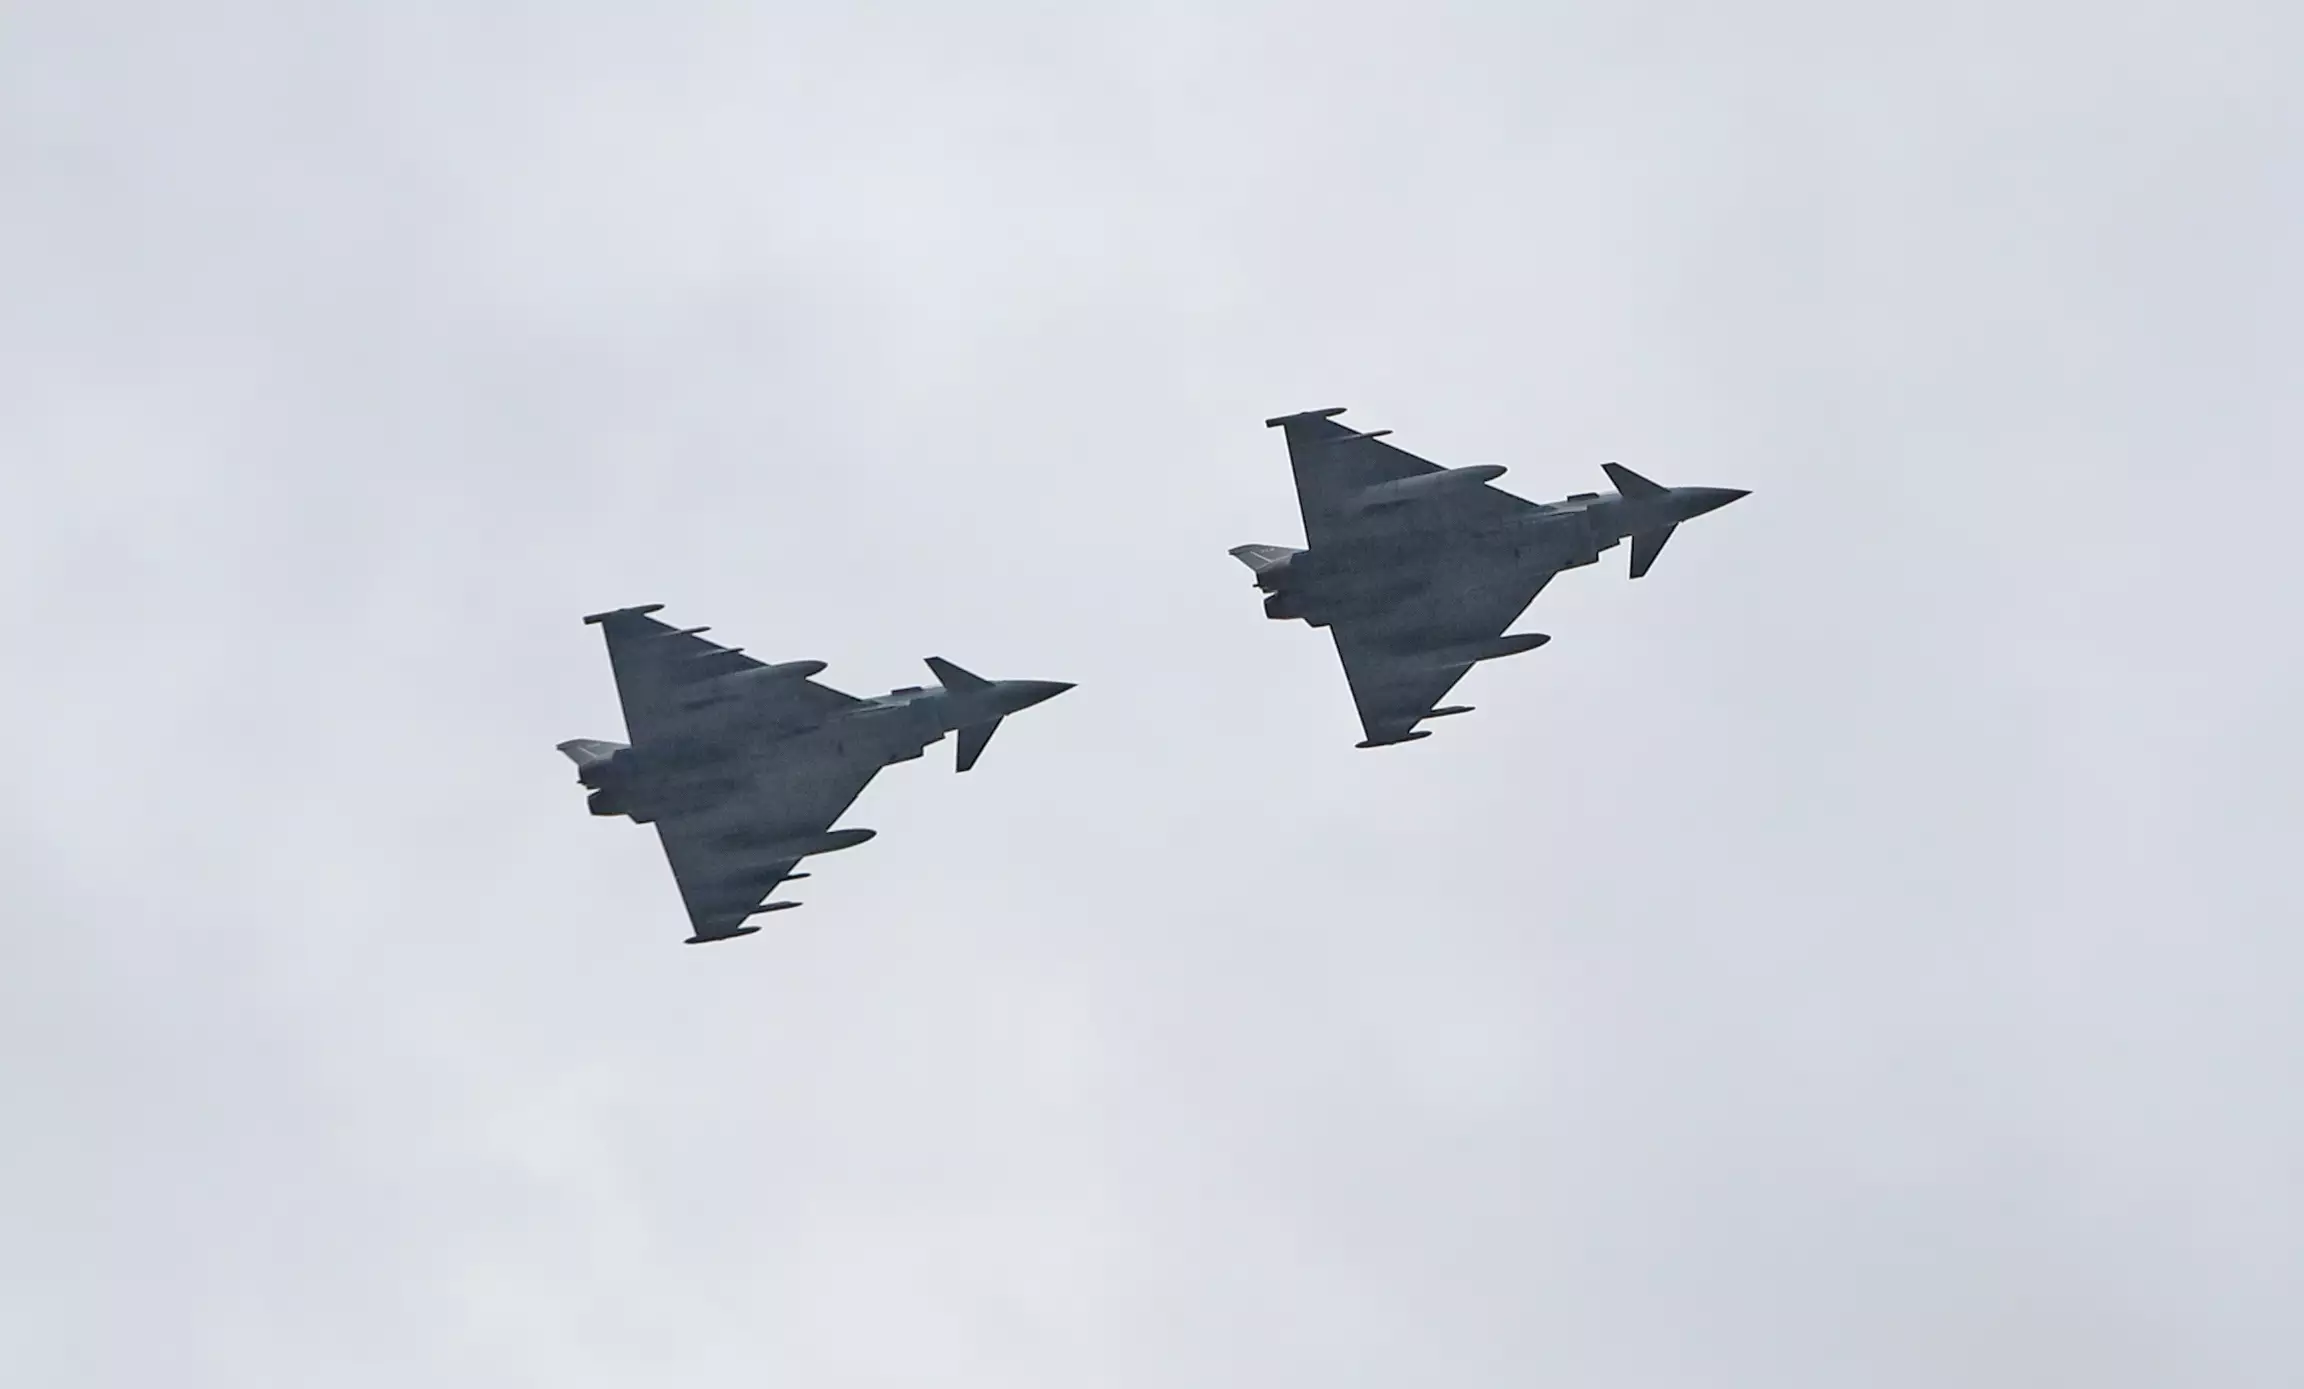 Stock image of two RAF Typhoon fighter jets.